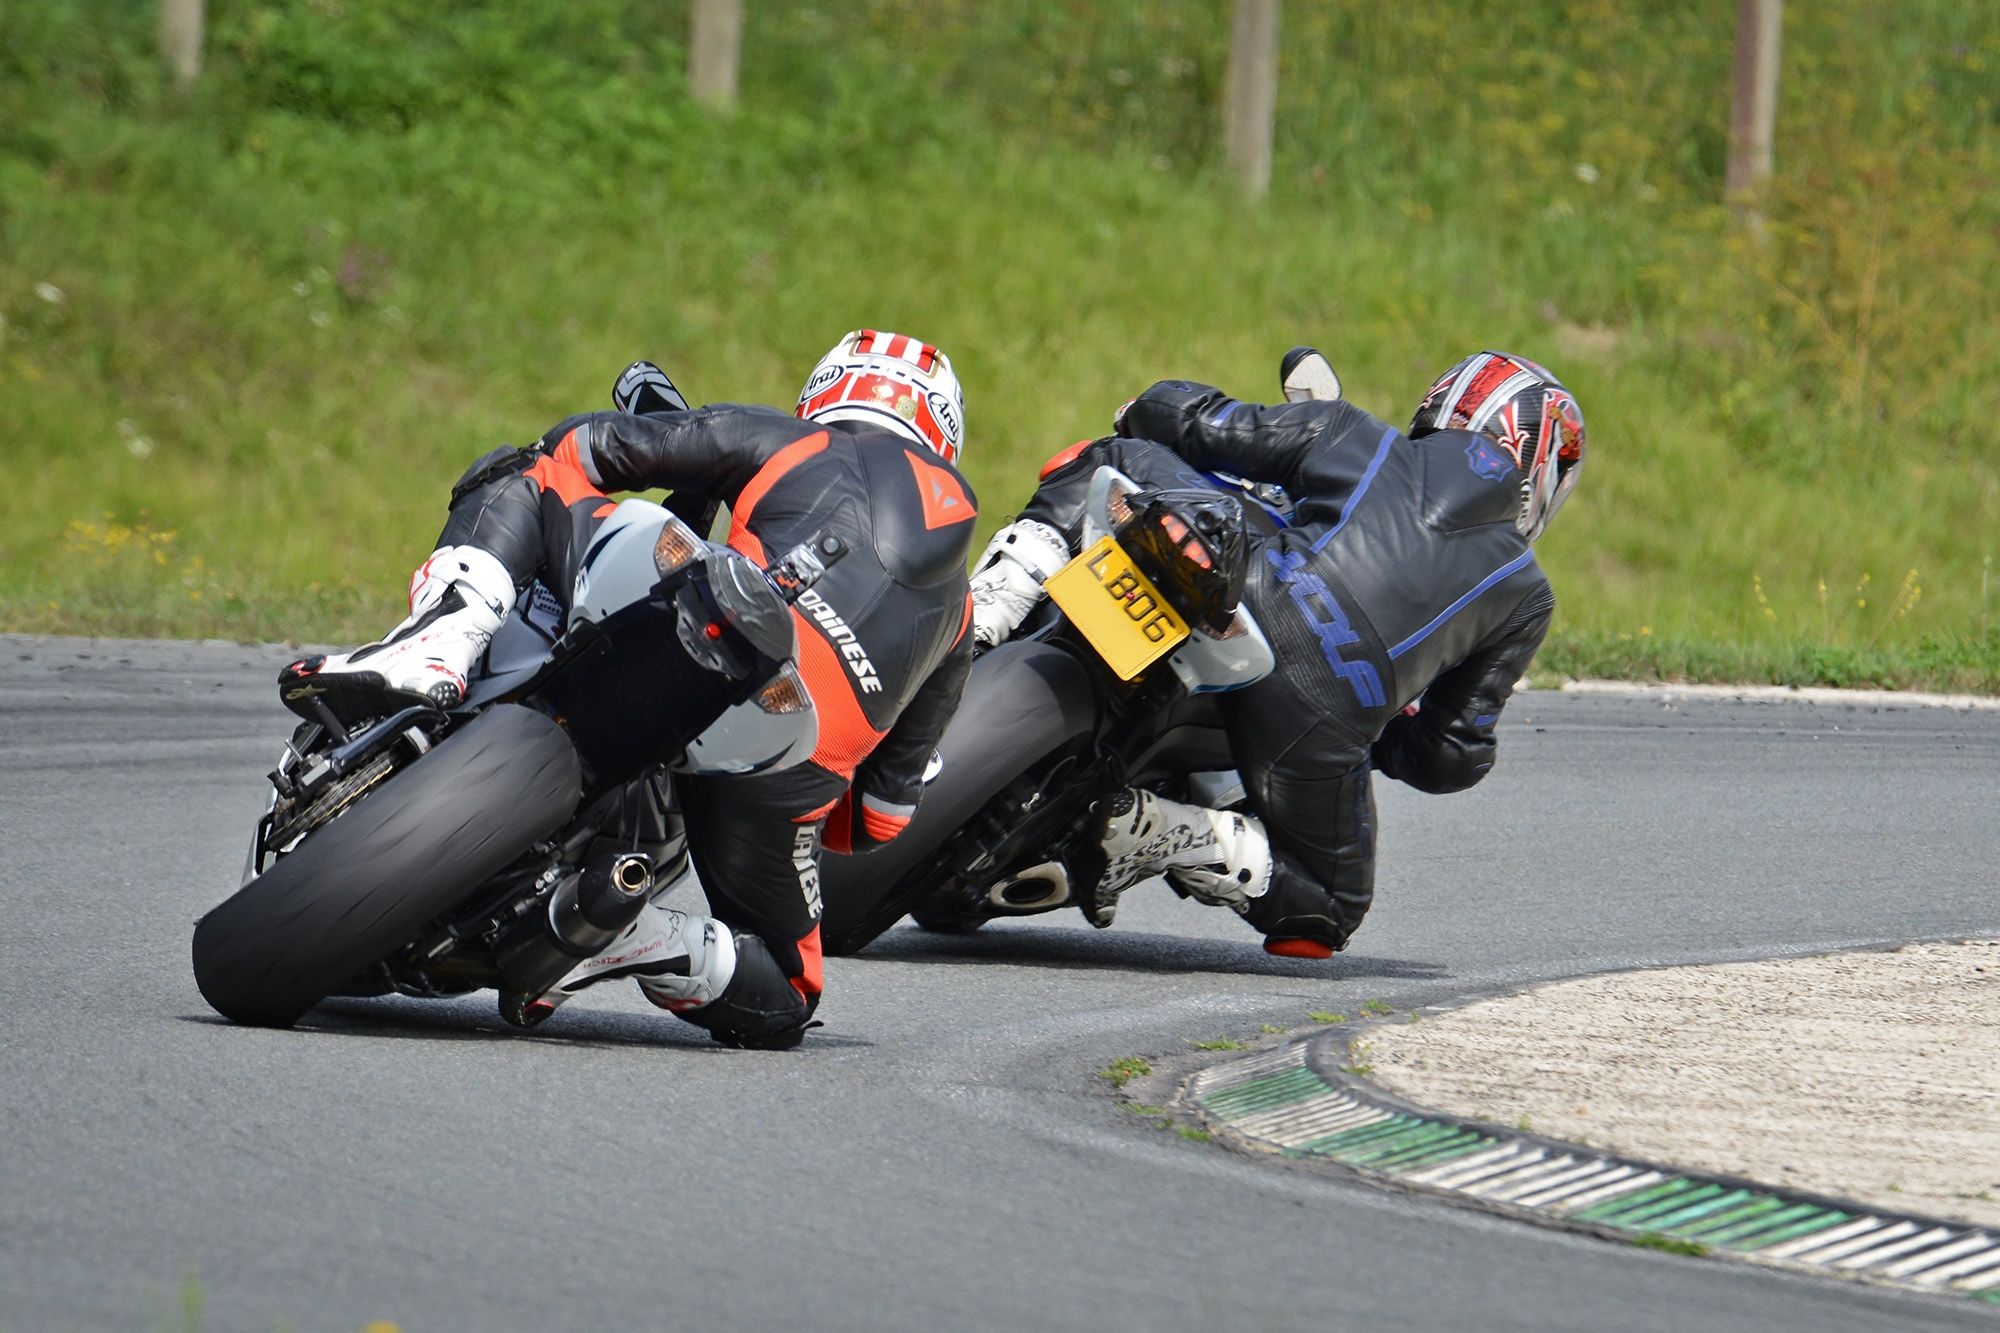 Track day riders rear view going around a corner